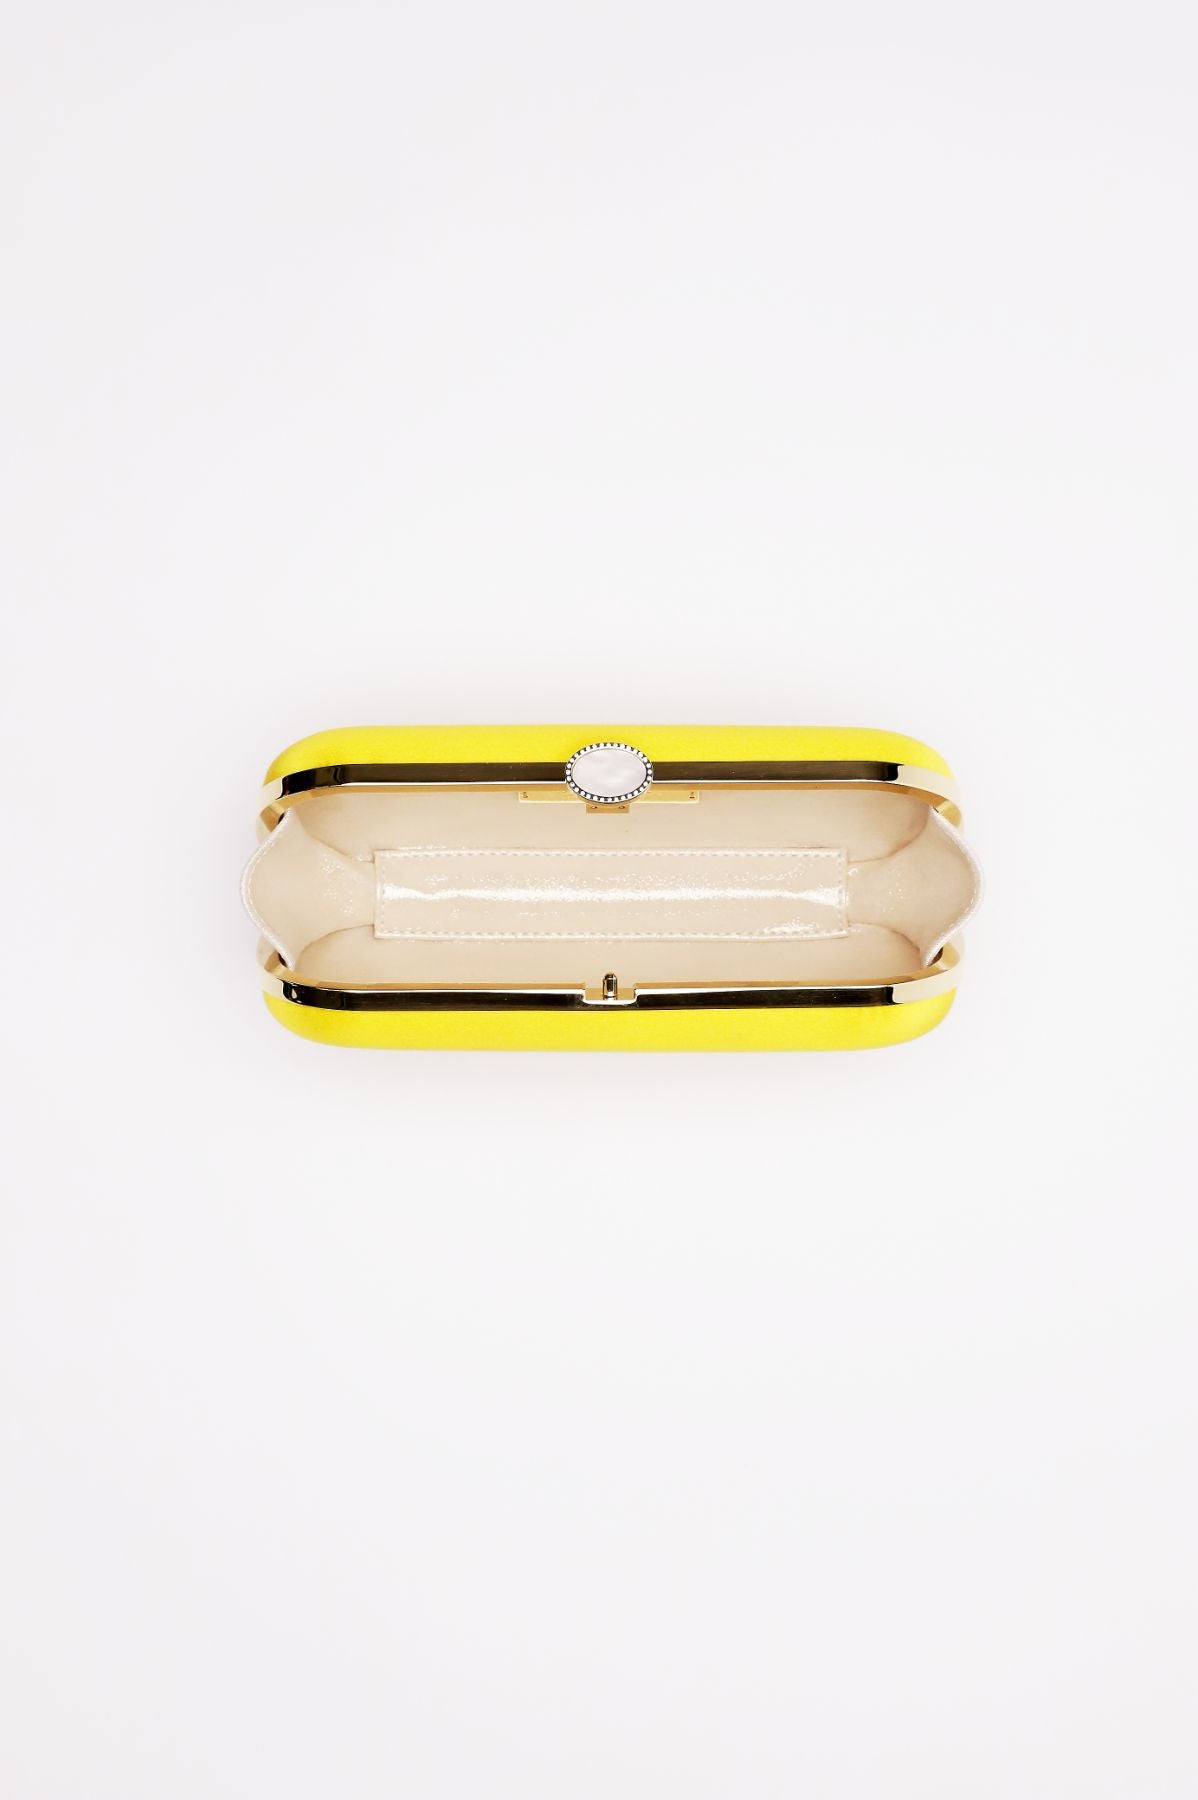 A Bella Clutch Limoncello Yellow Petite by The Bella Rosa Collection with a white interior and a silver clasp on a white background.